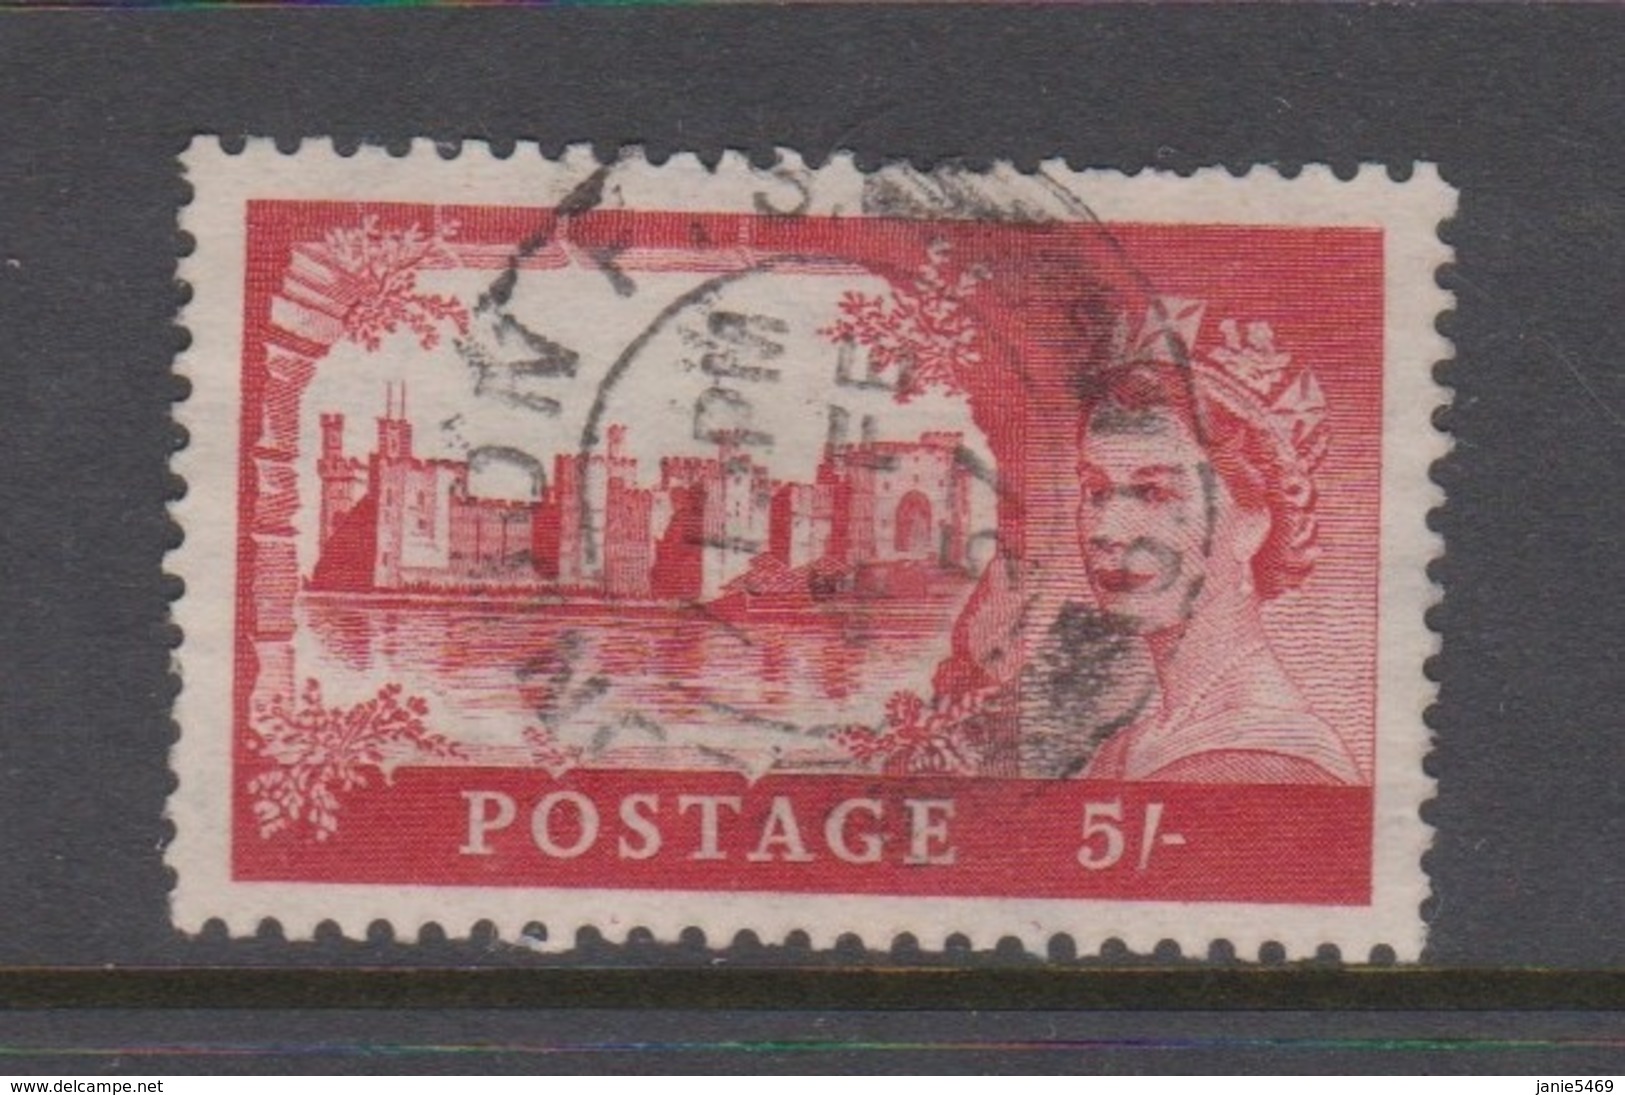 Great Britain SG 596 1959 Queen Elizabeth II ,High Values 5 Sh Red,used - Used Stamps